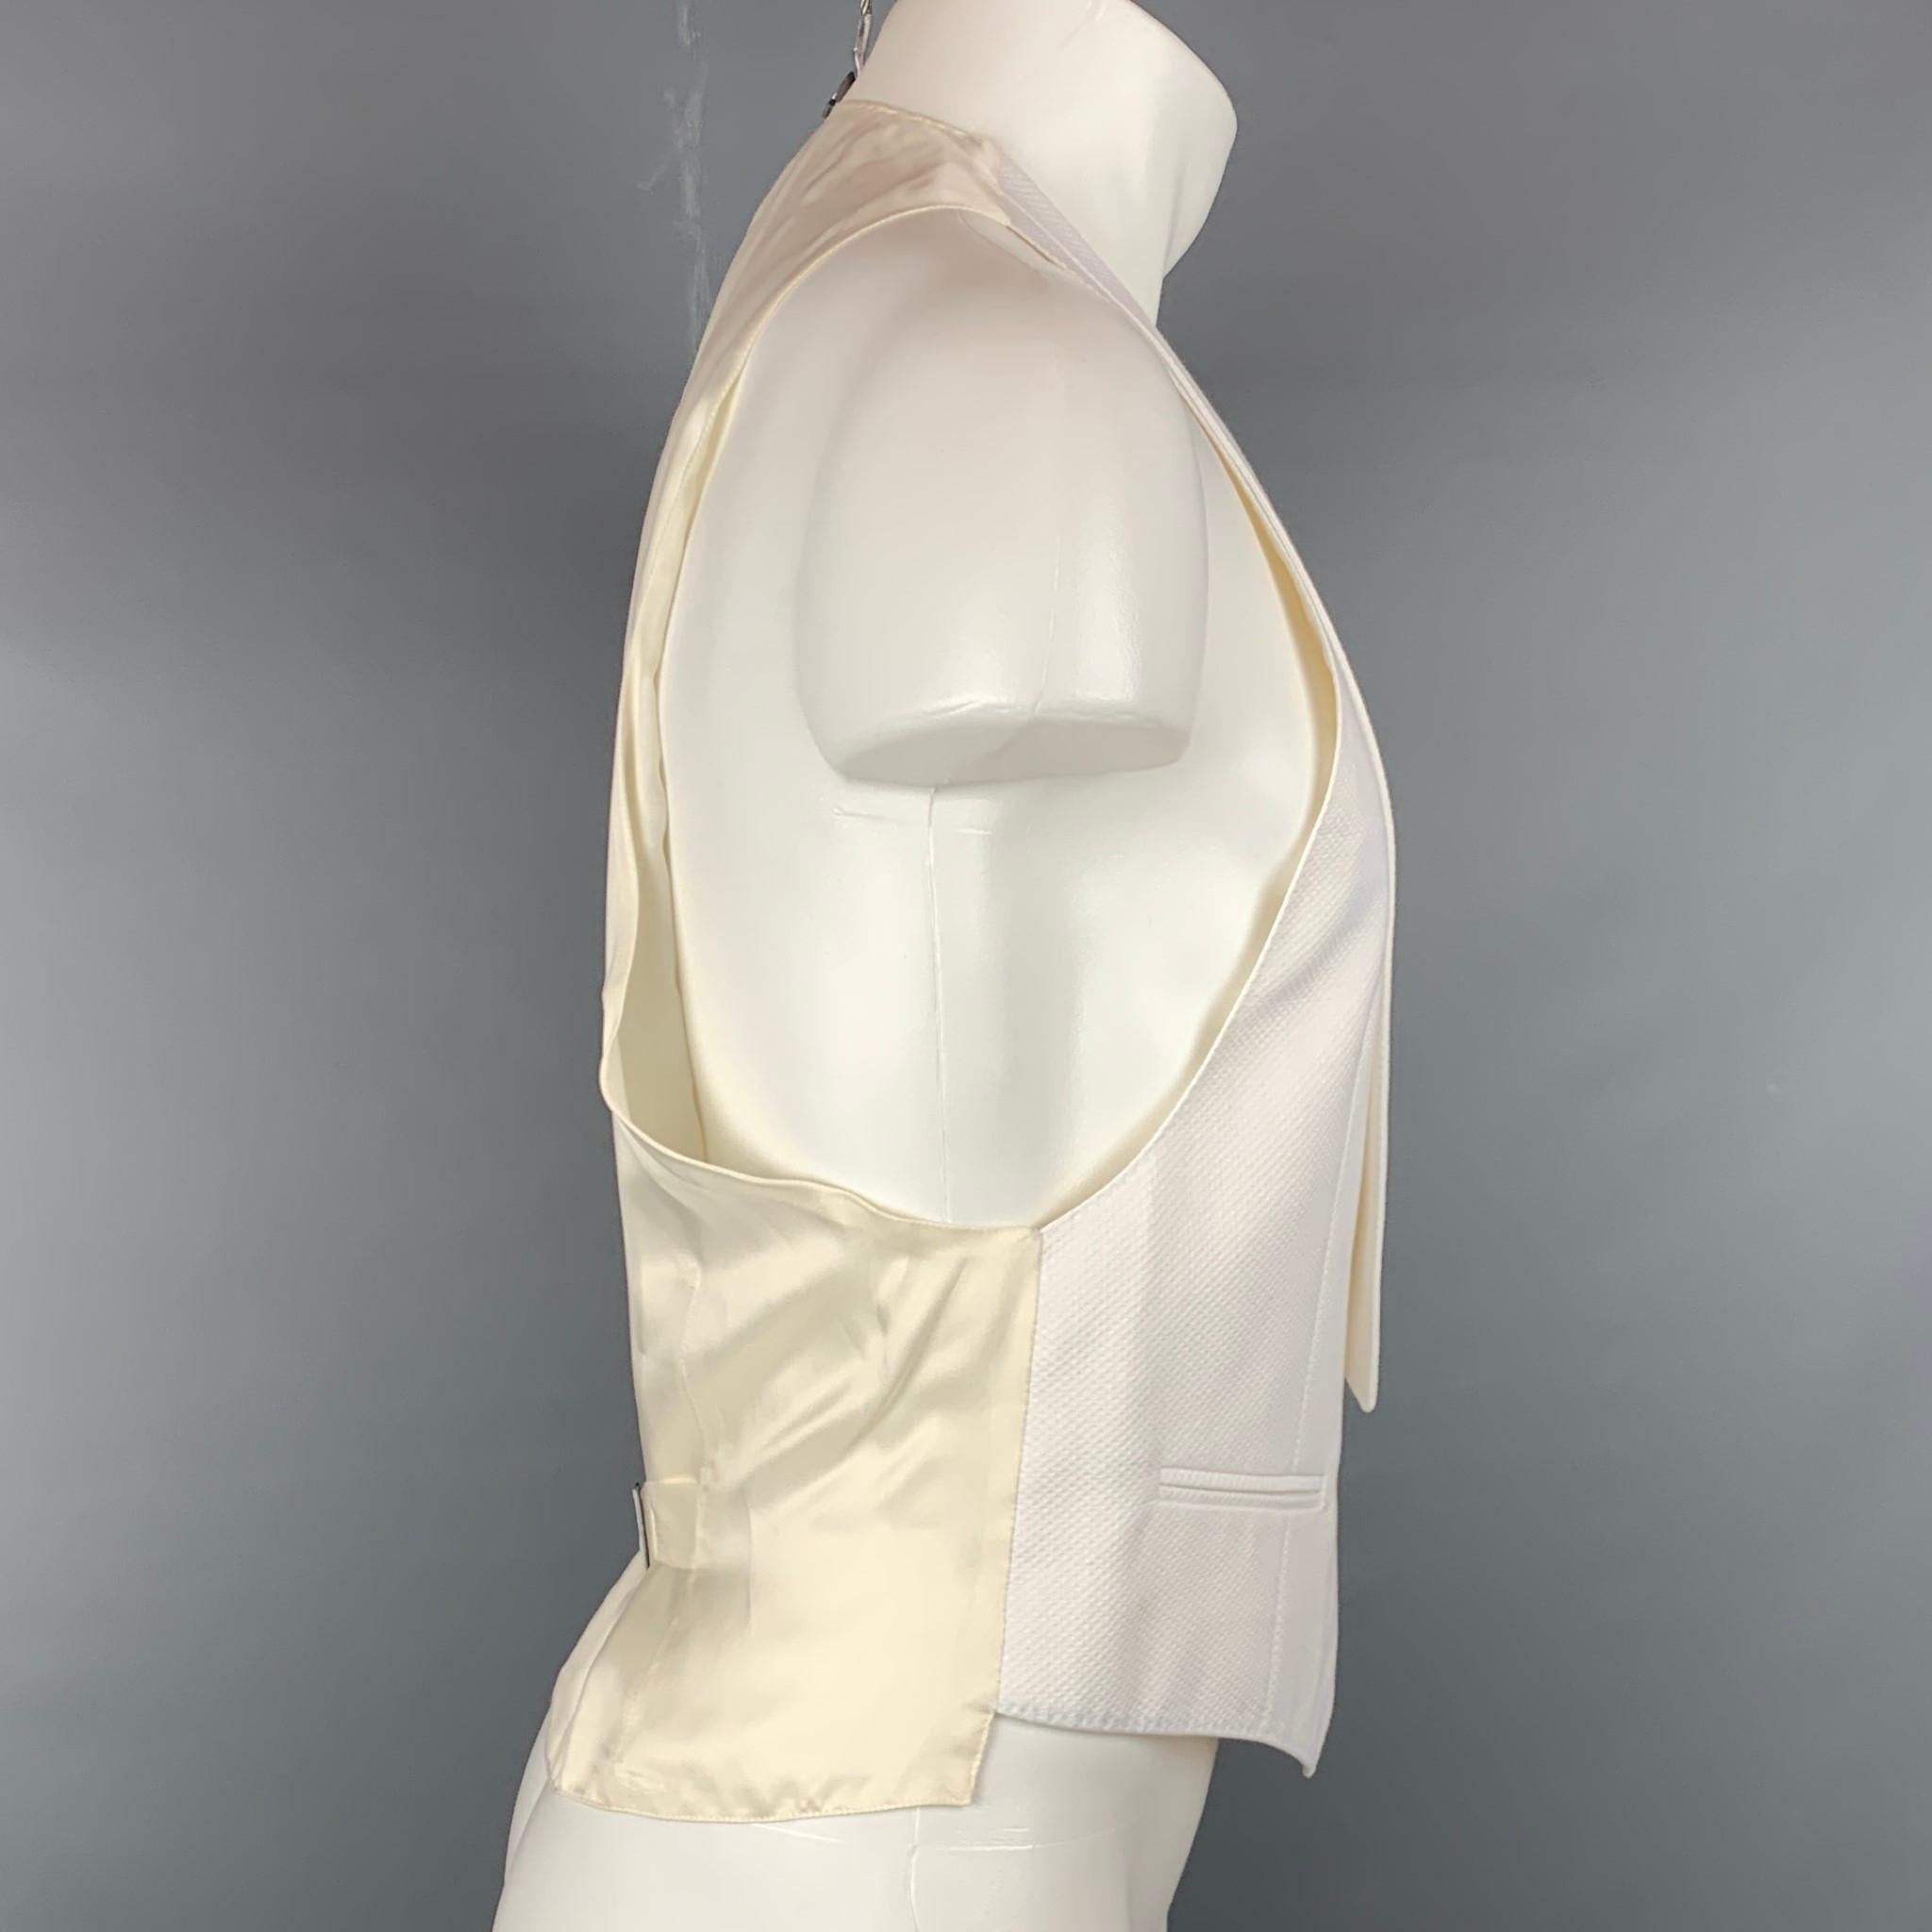 CANALI tuxedo vest comes in a white woven cotton with a full liner featuring a flap collar, slit pockets, and a buttoned closure. Made in Italy.

Very Good Pre-Owned Condition.
Marked: 54

Measurements:

Shoulder: 11.5 in.
Chest: 40 in.
Length: 22.5